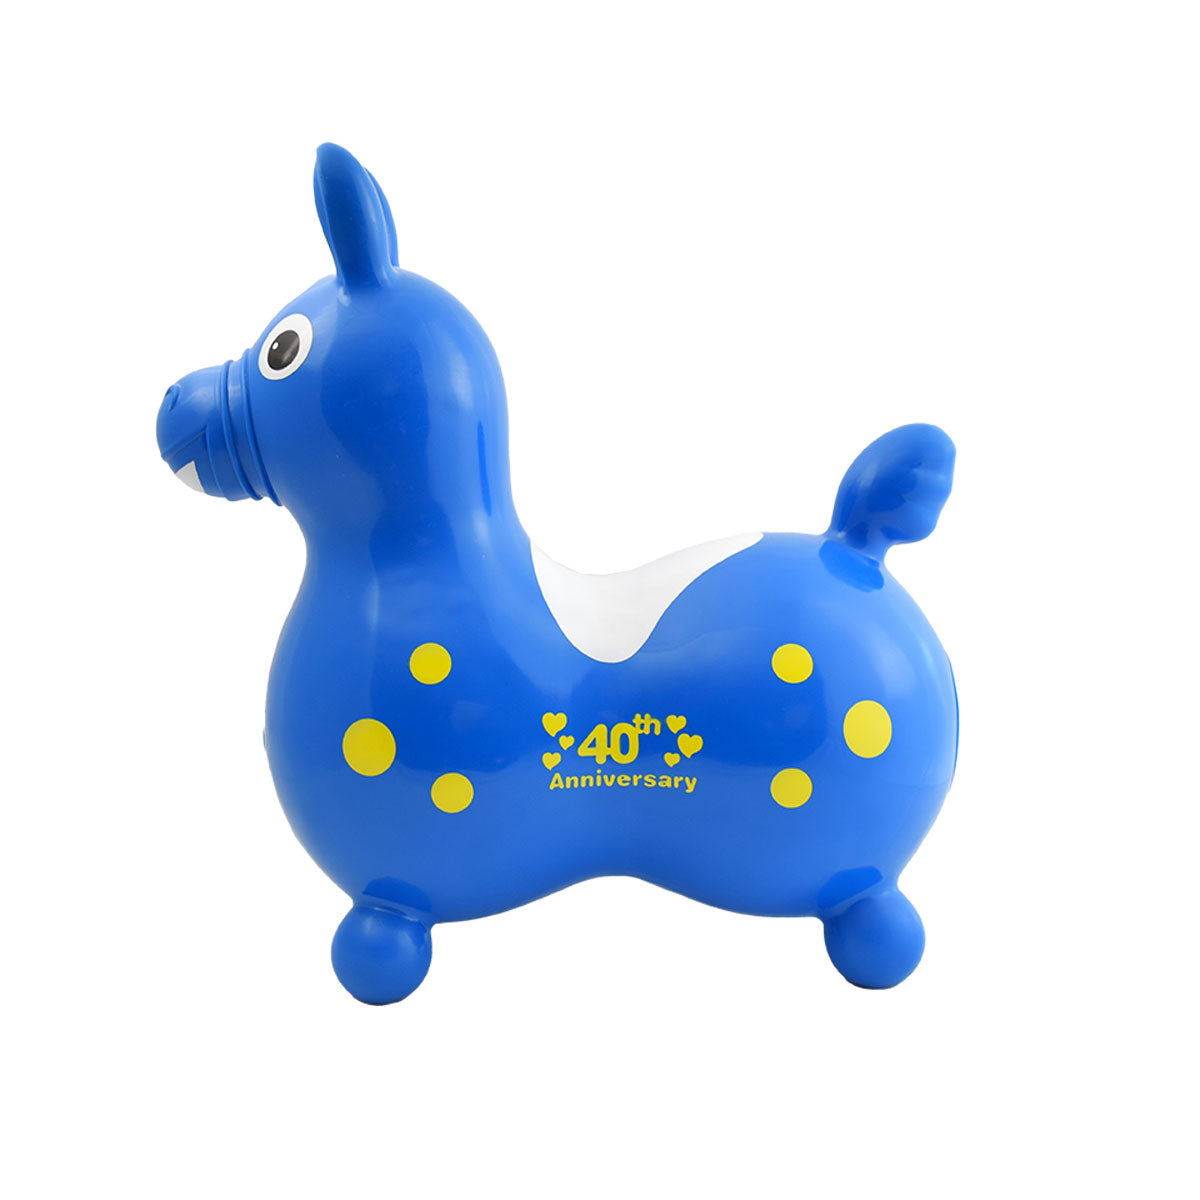 Limited Edition 40th Anniversary Rody Inflatable Bounce Horse With Pump